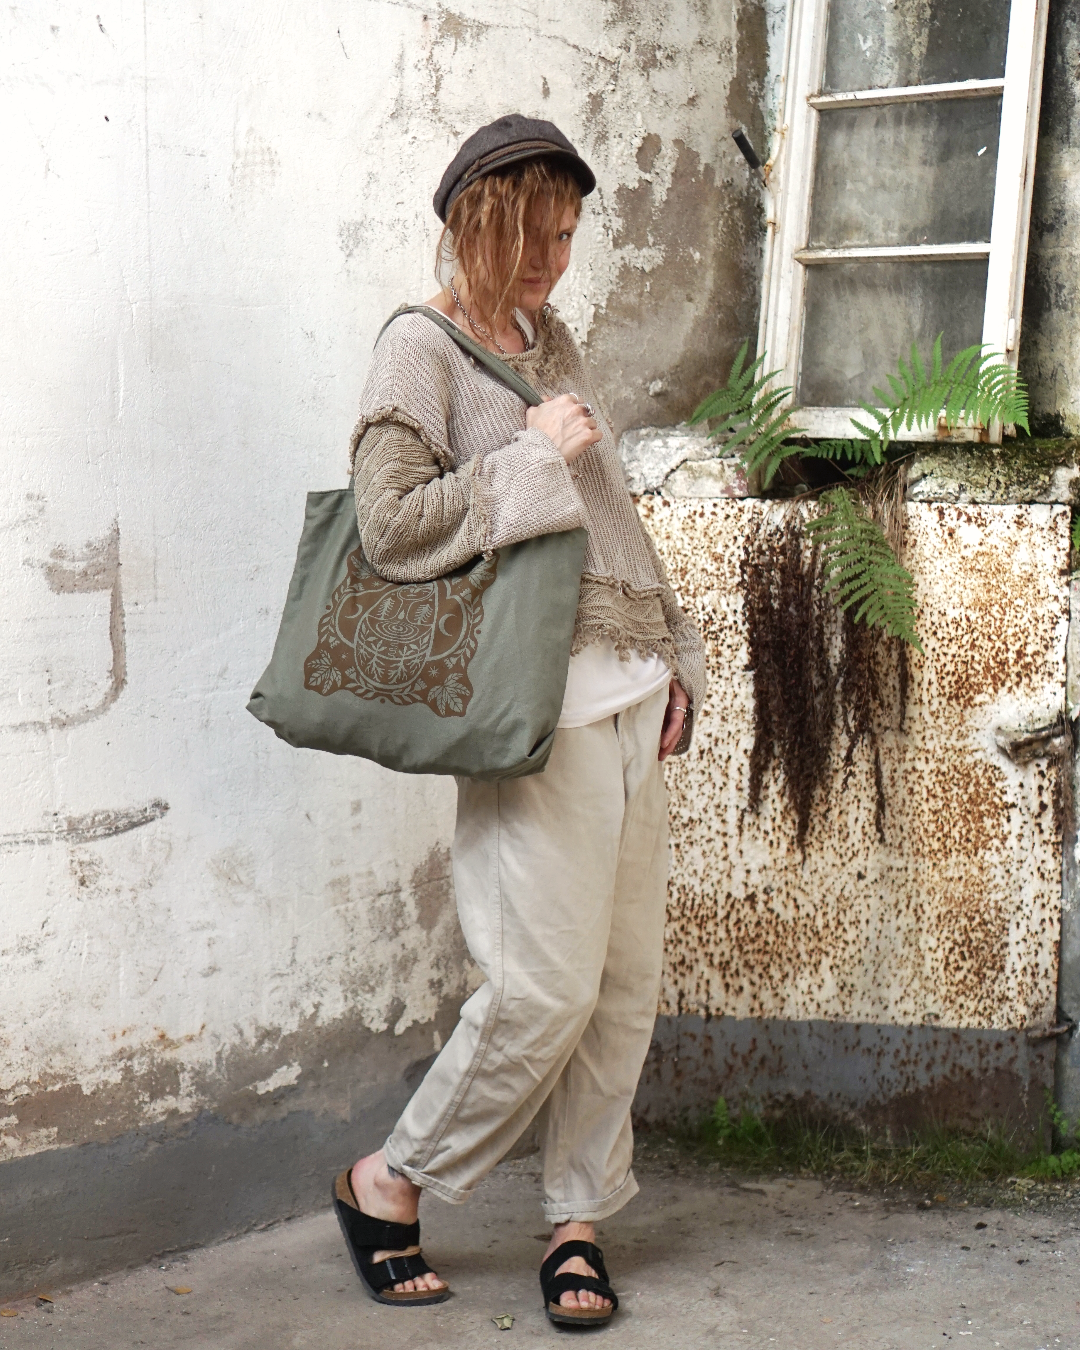 Tote Bag Keeper of the Forest - Green / Brown